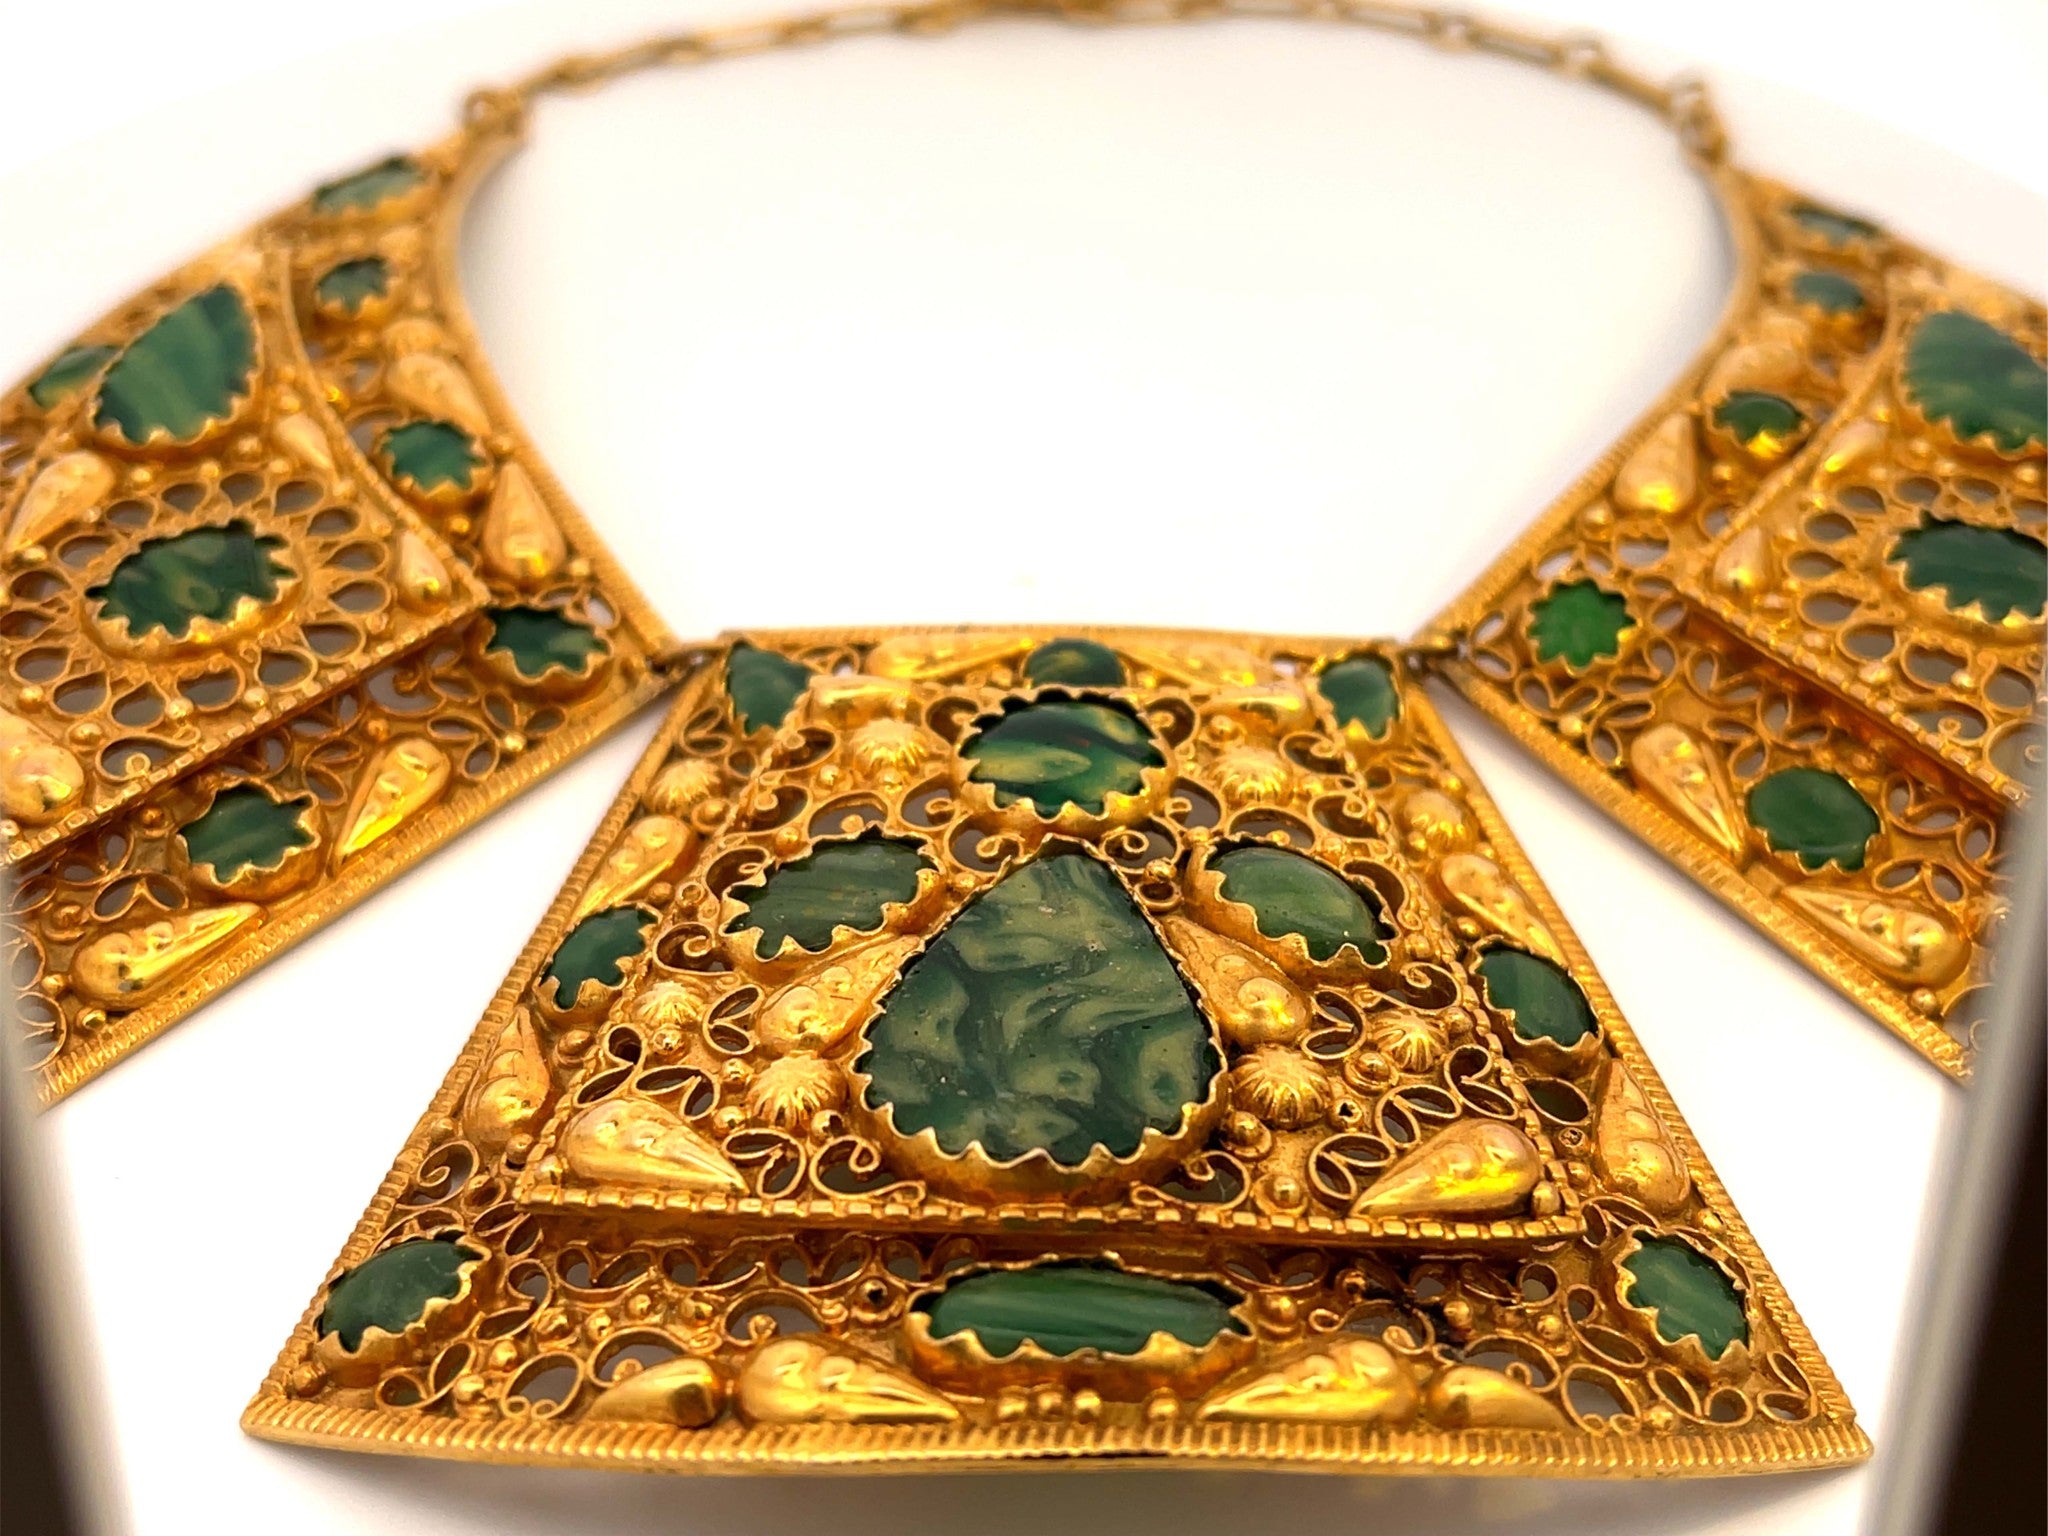 Rare Gold Egyptian Necklace with Green Venetian Stained Glass